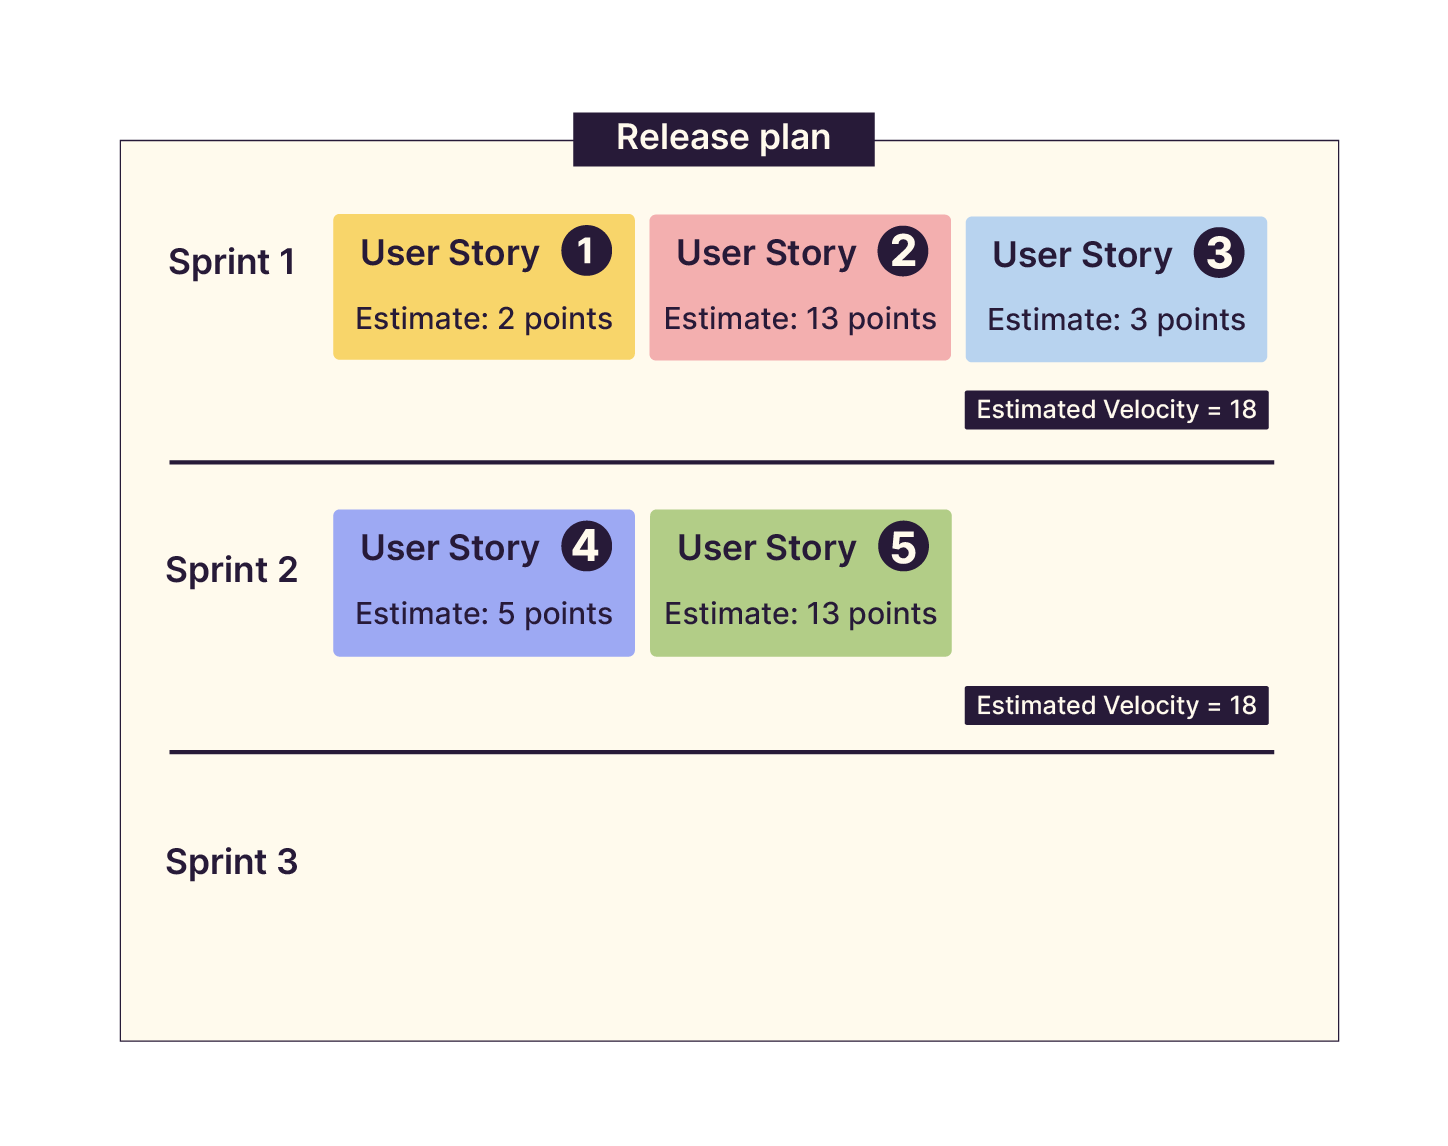 Two more User Stories are grouped in a second Sprint. Their Story Points add up to 18 points.